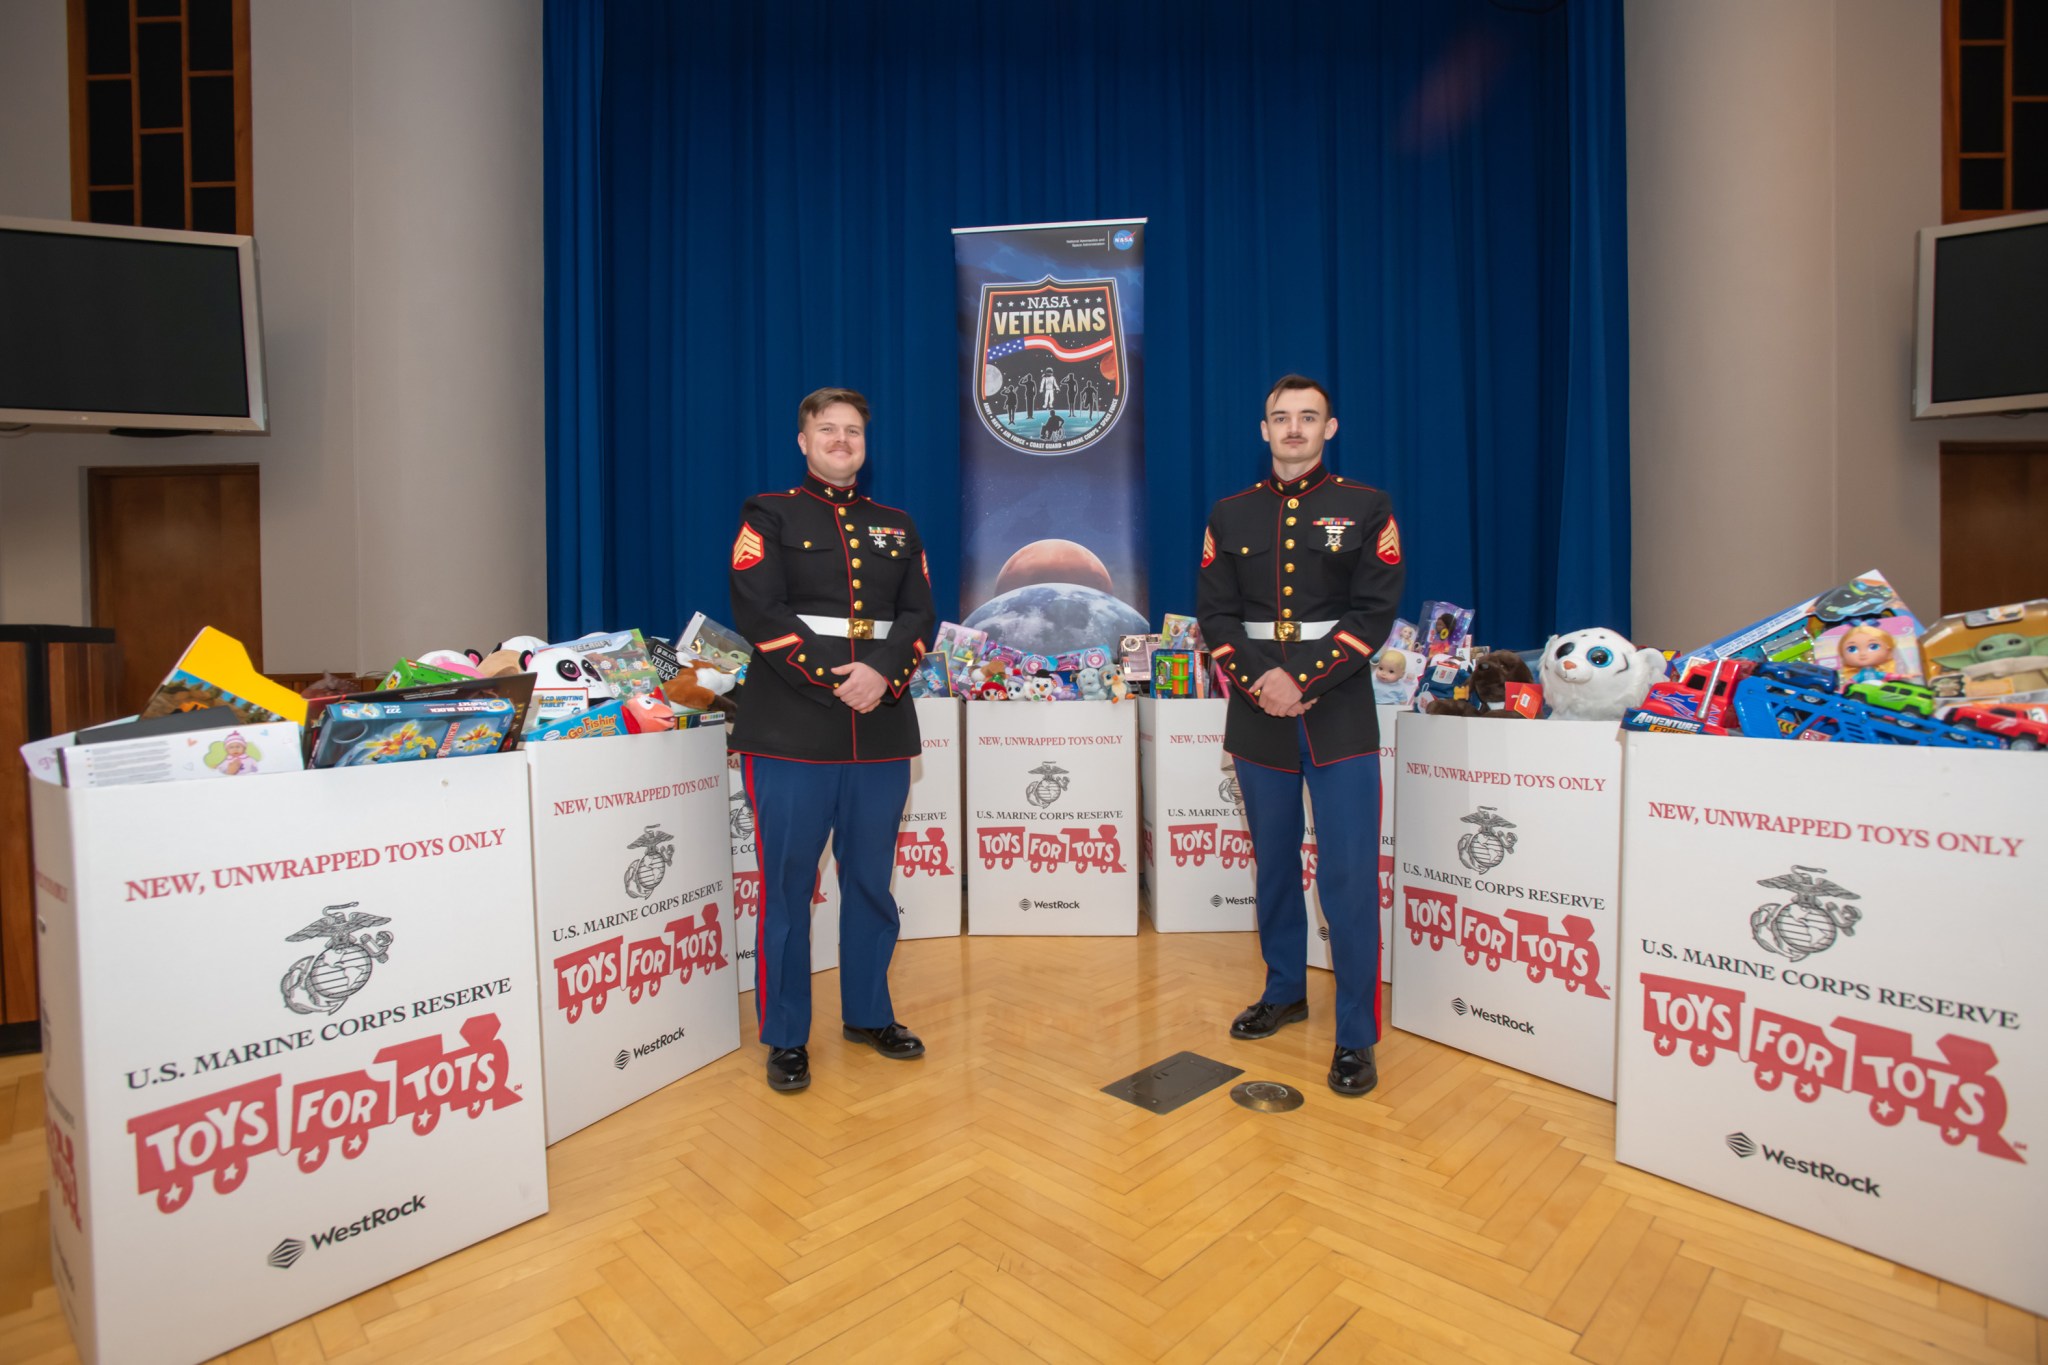 Two Marine Corps reservists in uniform stand in front of a stage with ten boxes filled with toys. The NASA Veterans emblem banner hangs high in the background.